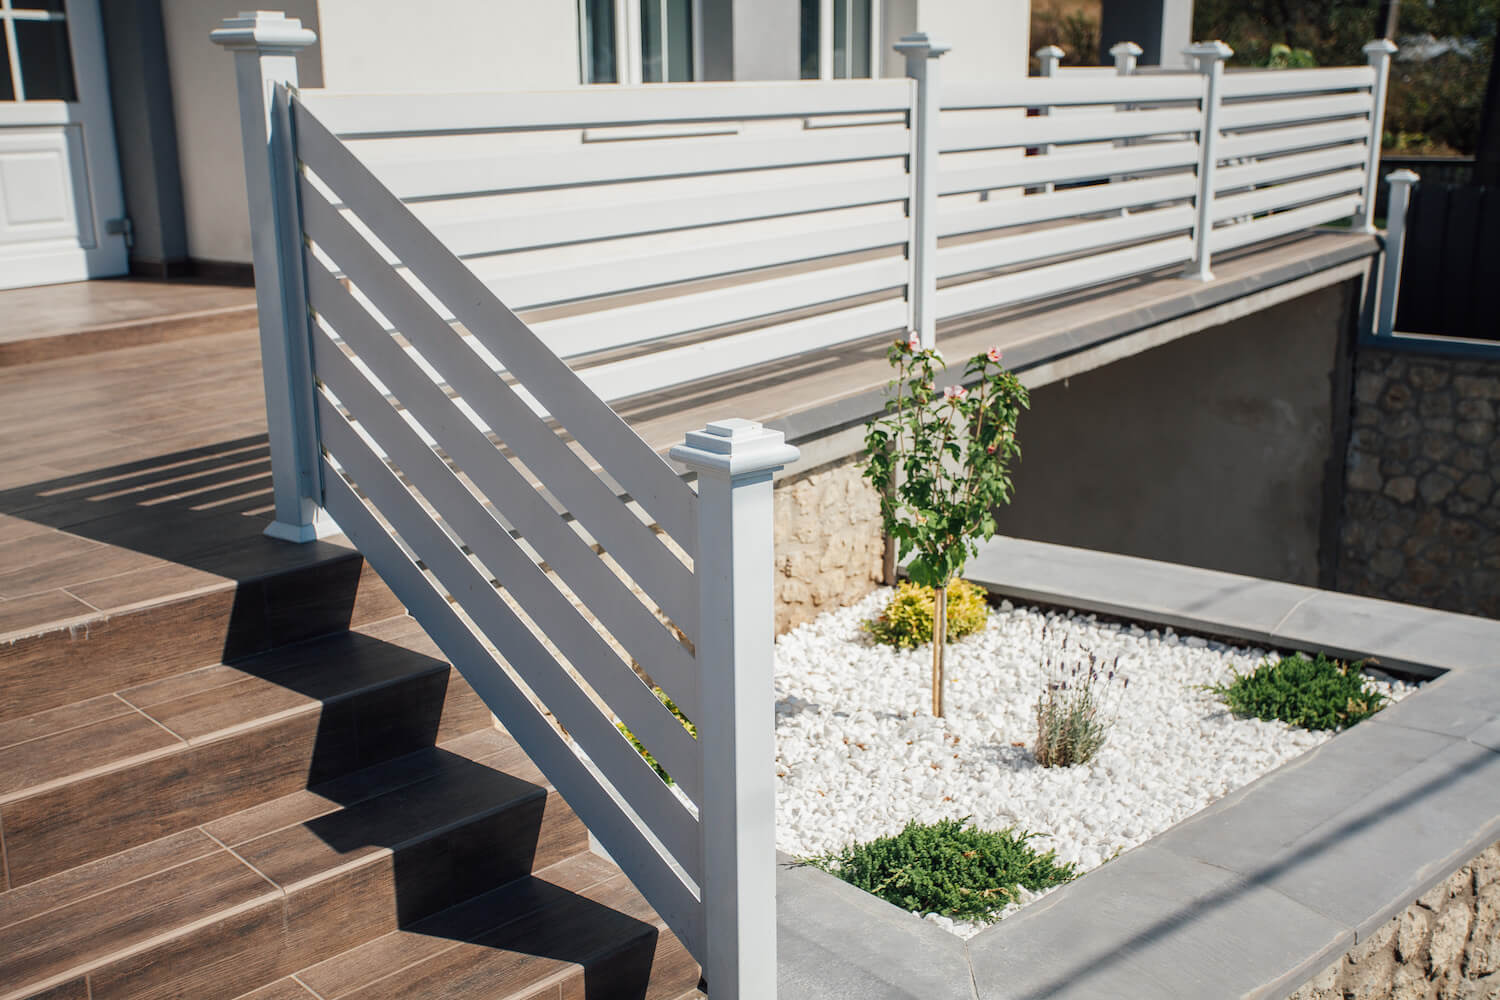 Custom Deck Railing To Match Your Home and Deck